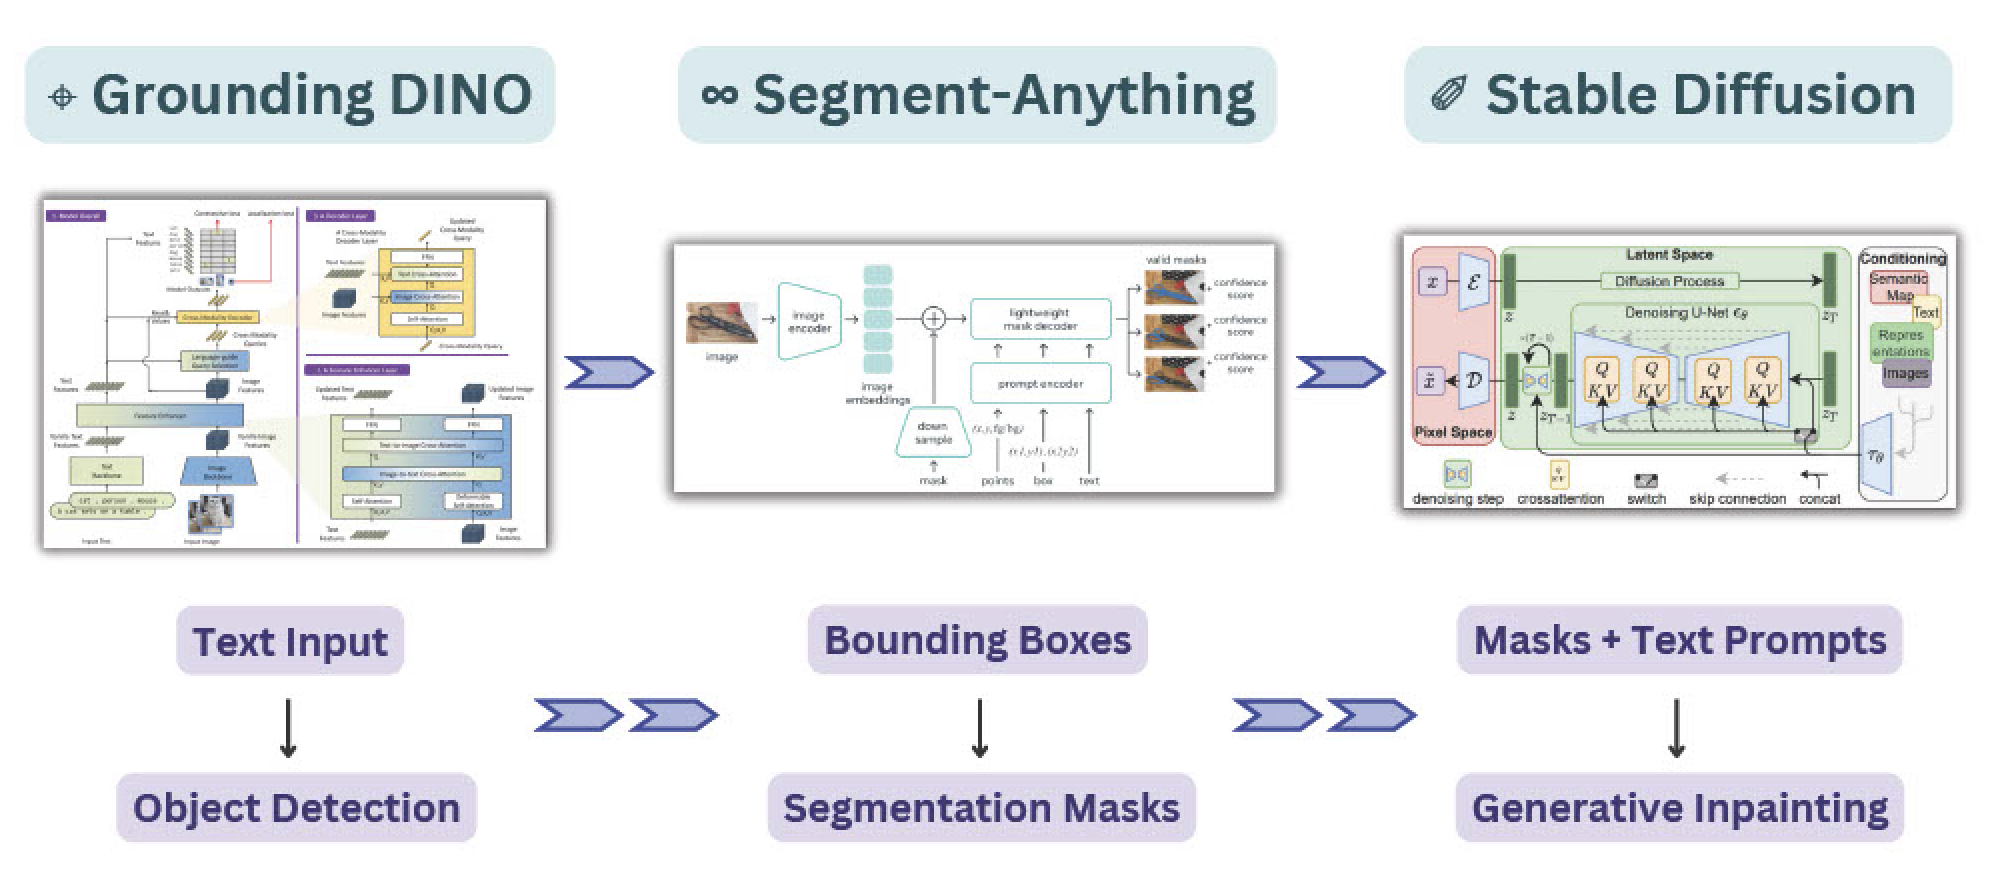 A diagram of our text-to-image inpainting pipeline, including GroundingDINO for object detection, Segment Anything for segmentation masks, and Stable Diffusion for image inpainting/generative AI.